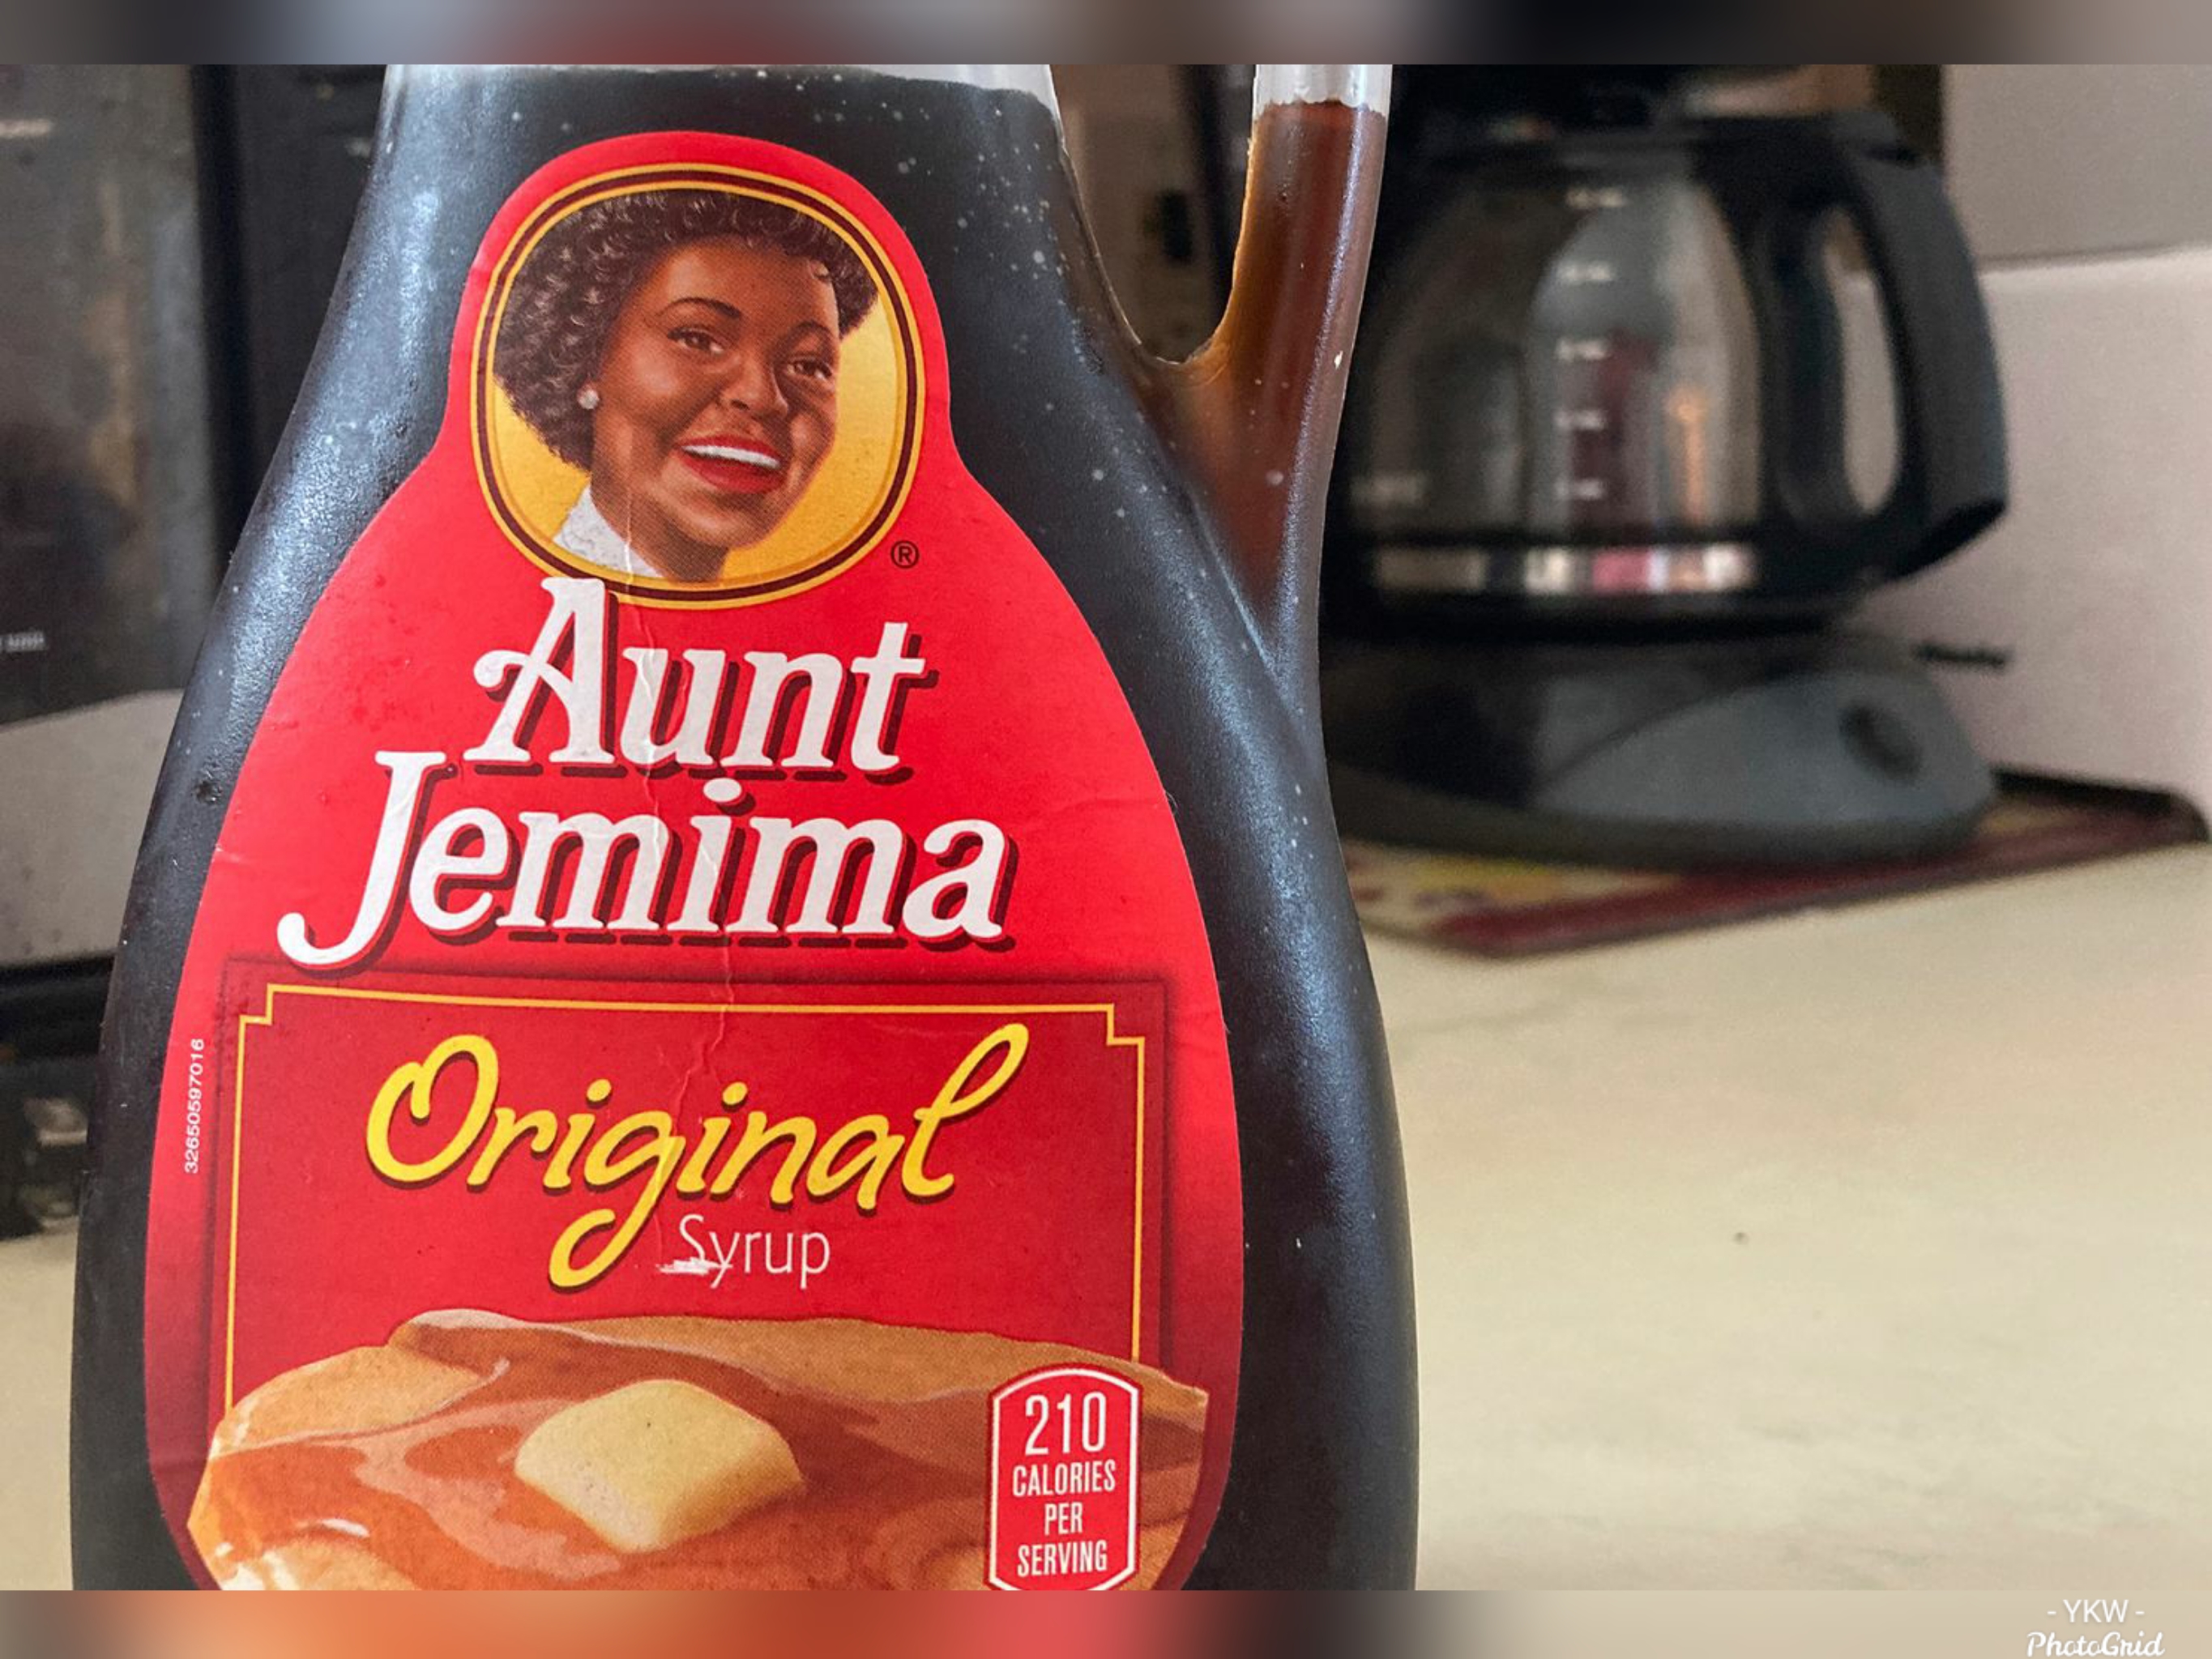 Aunt Jemima To Change Name And Image Due To Origins Based On Racial Stereotype